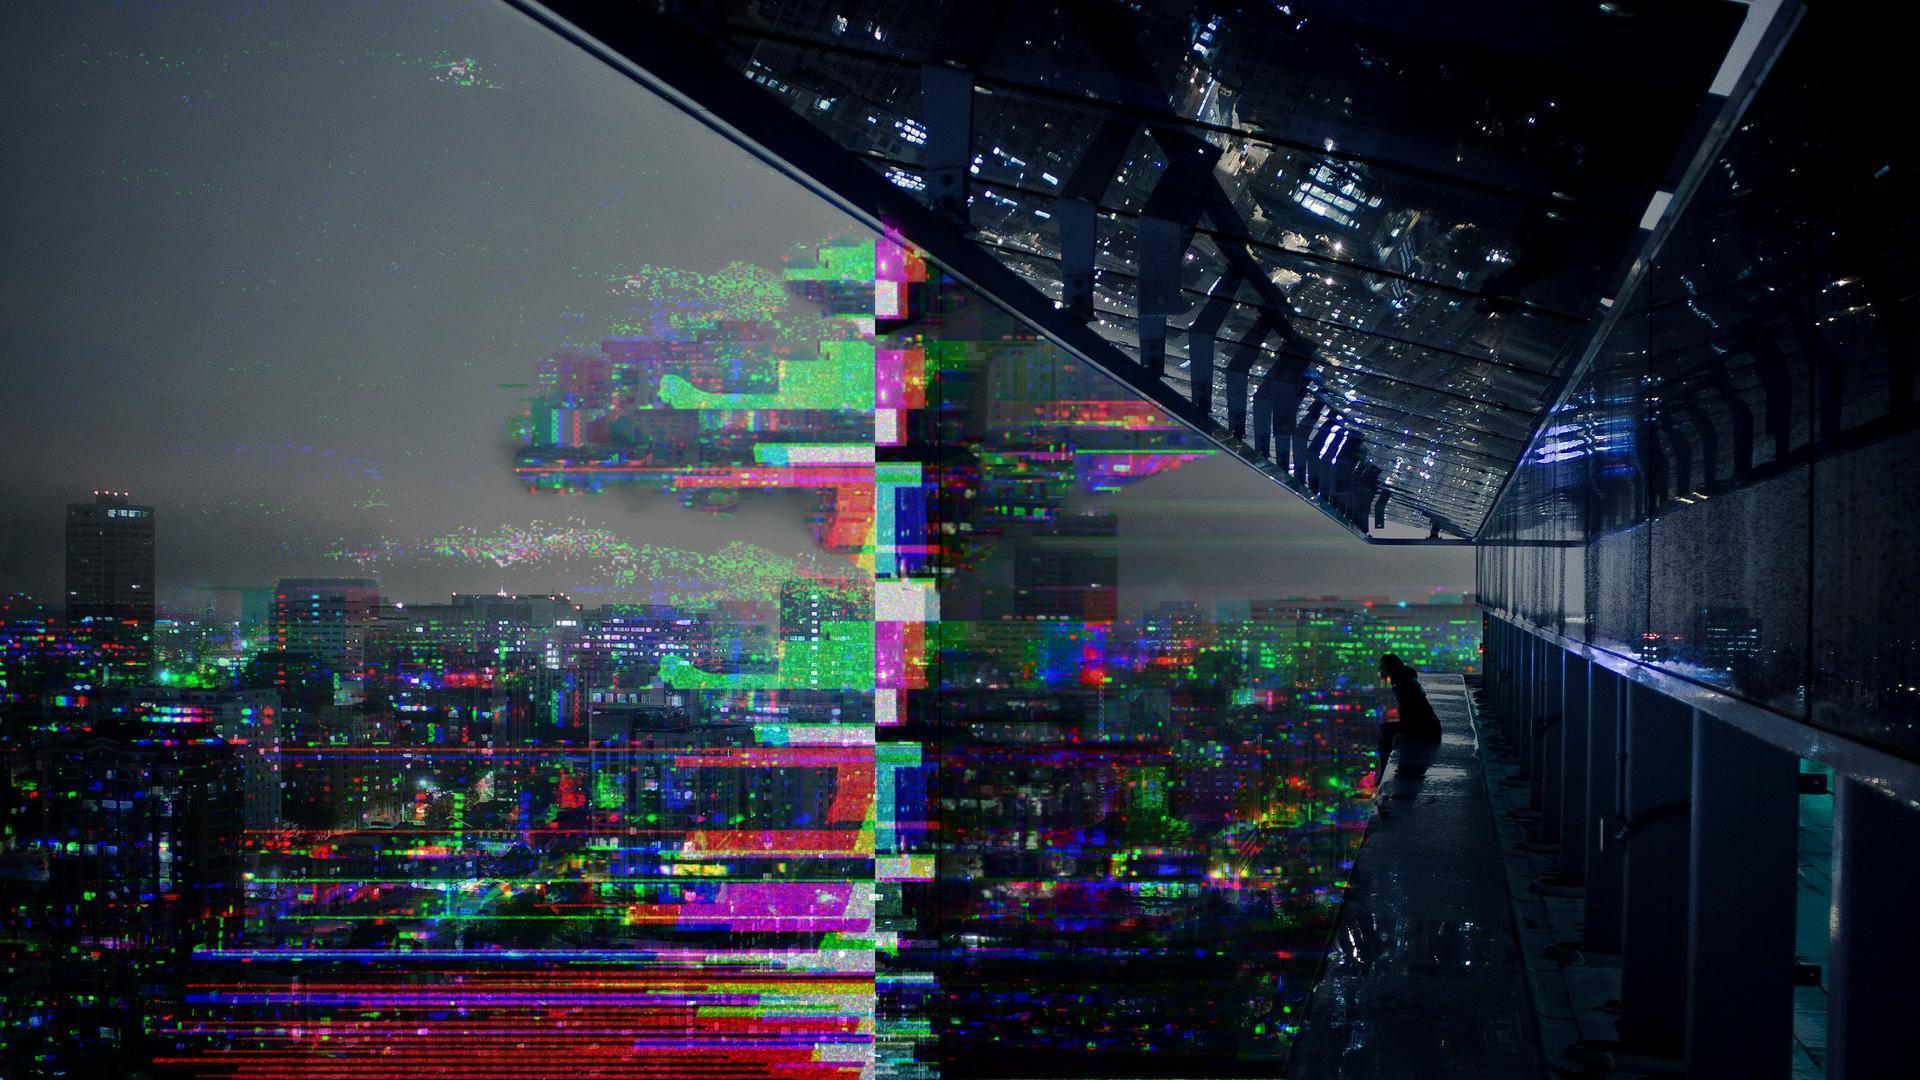 A city skyline with colorful buildings and lights - Glitch, depressing